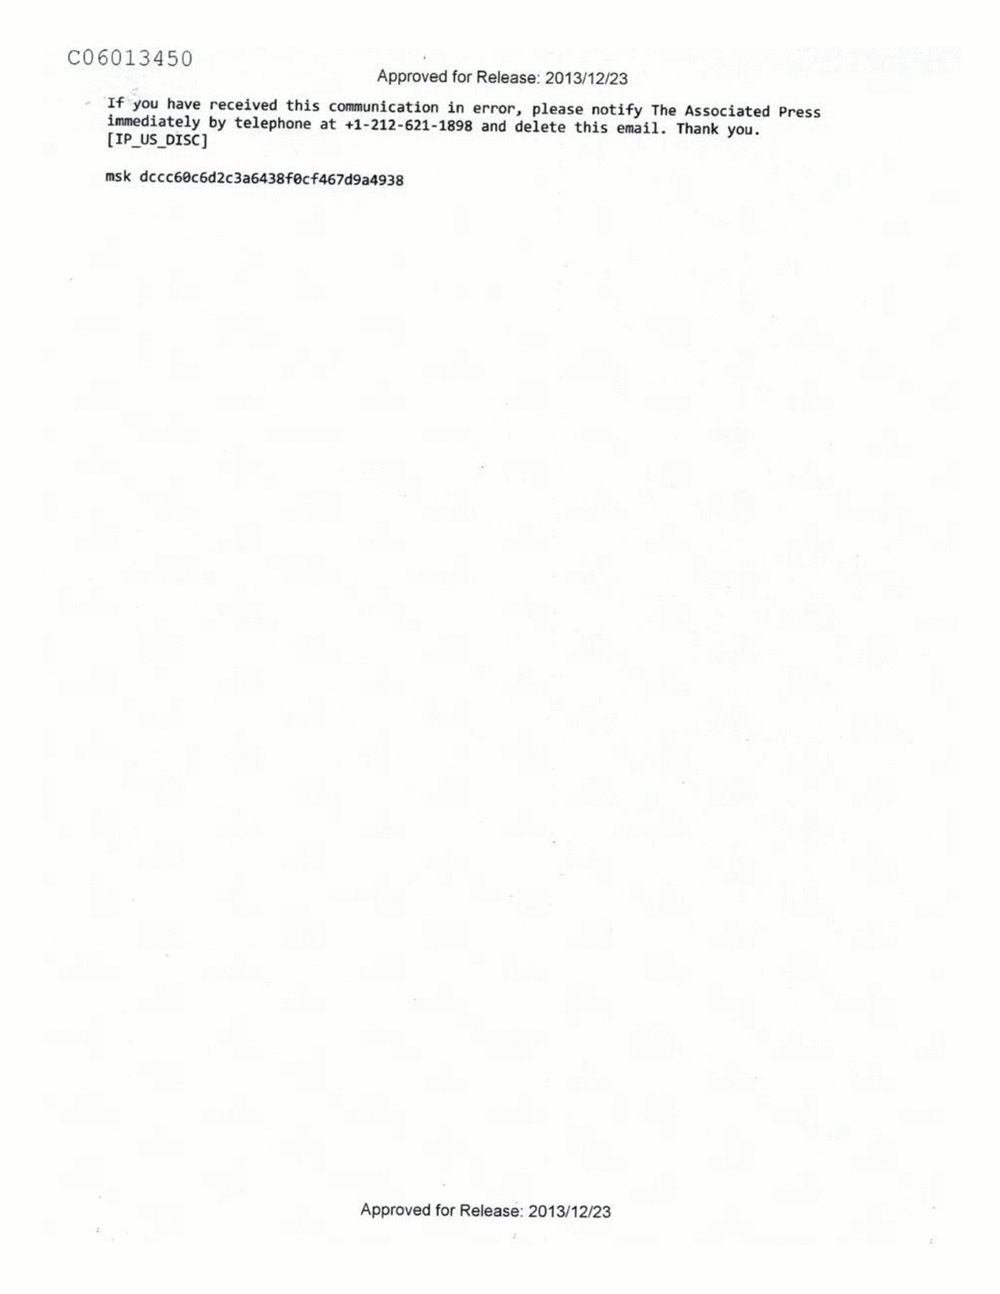 Page 318 from Email Correspondence Between Reporters and CIA Flacks